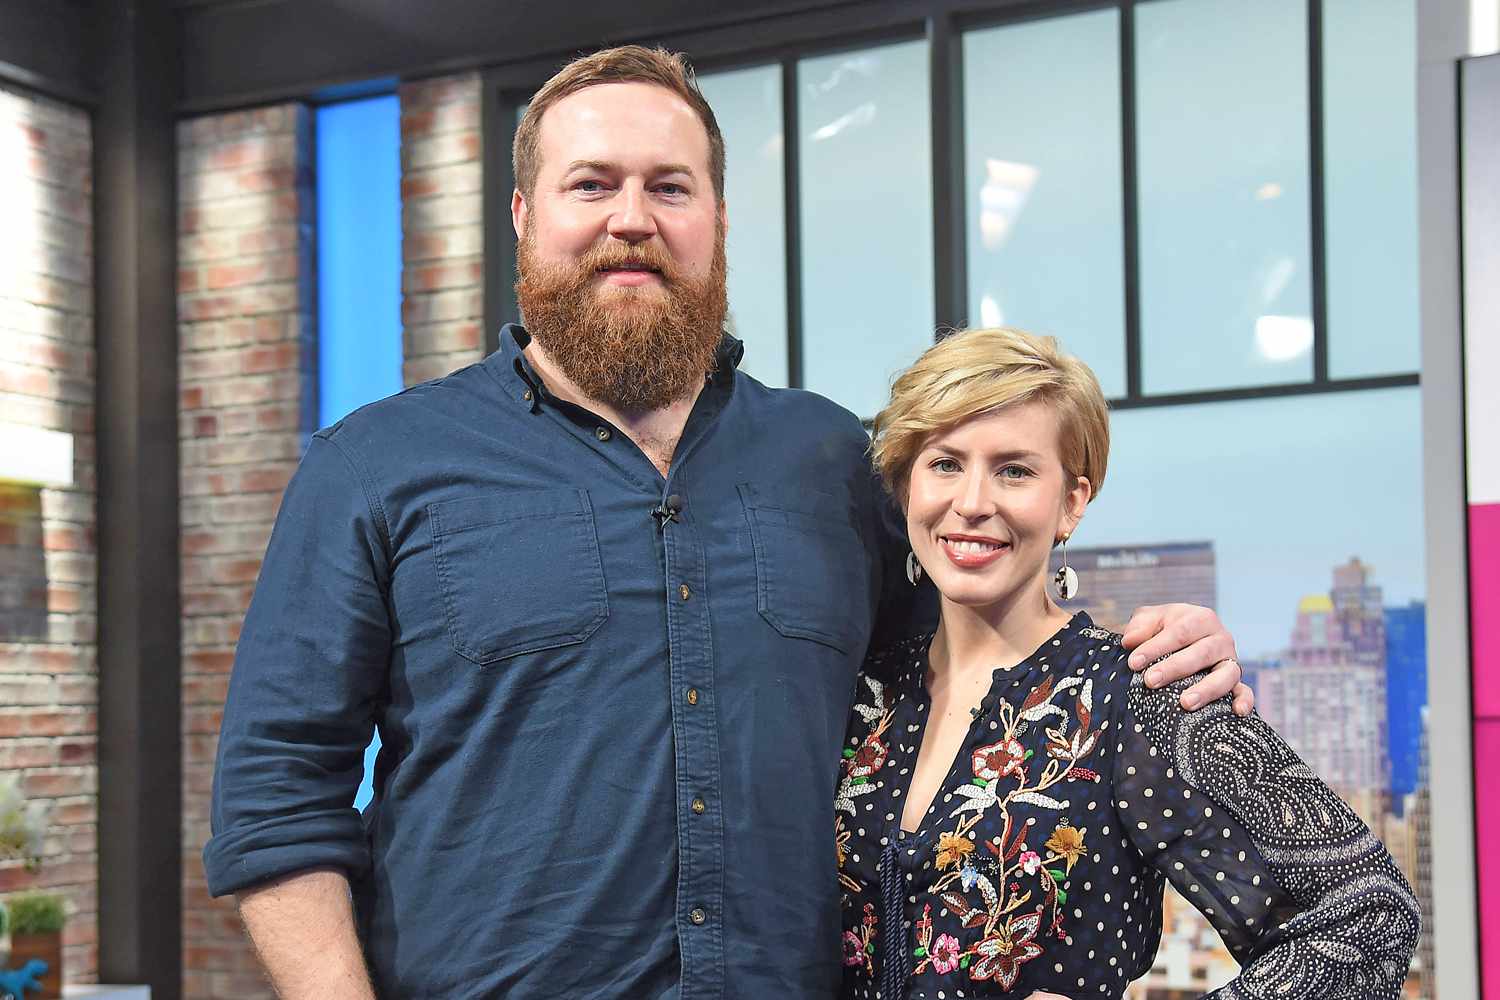 HGTV "Home Town" stars Ben Napier and Erin Napier visit People Now on January 08, 2020 in New York City